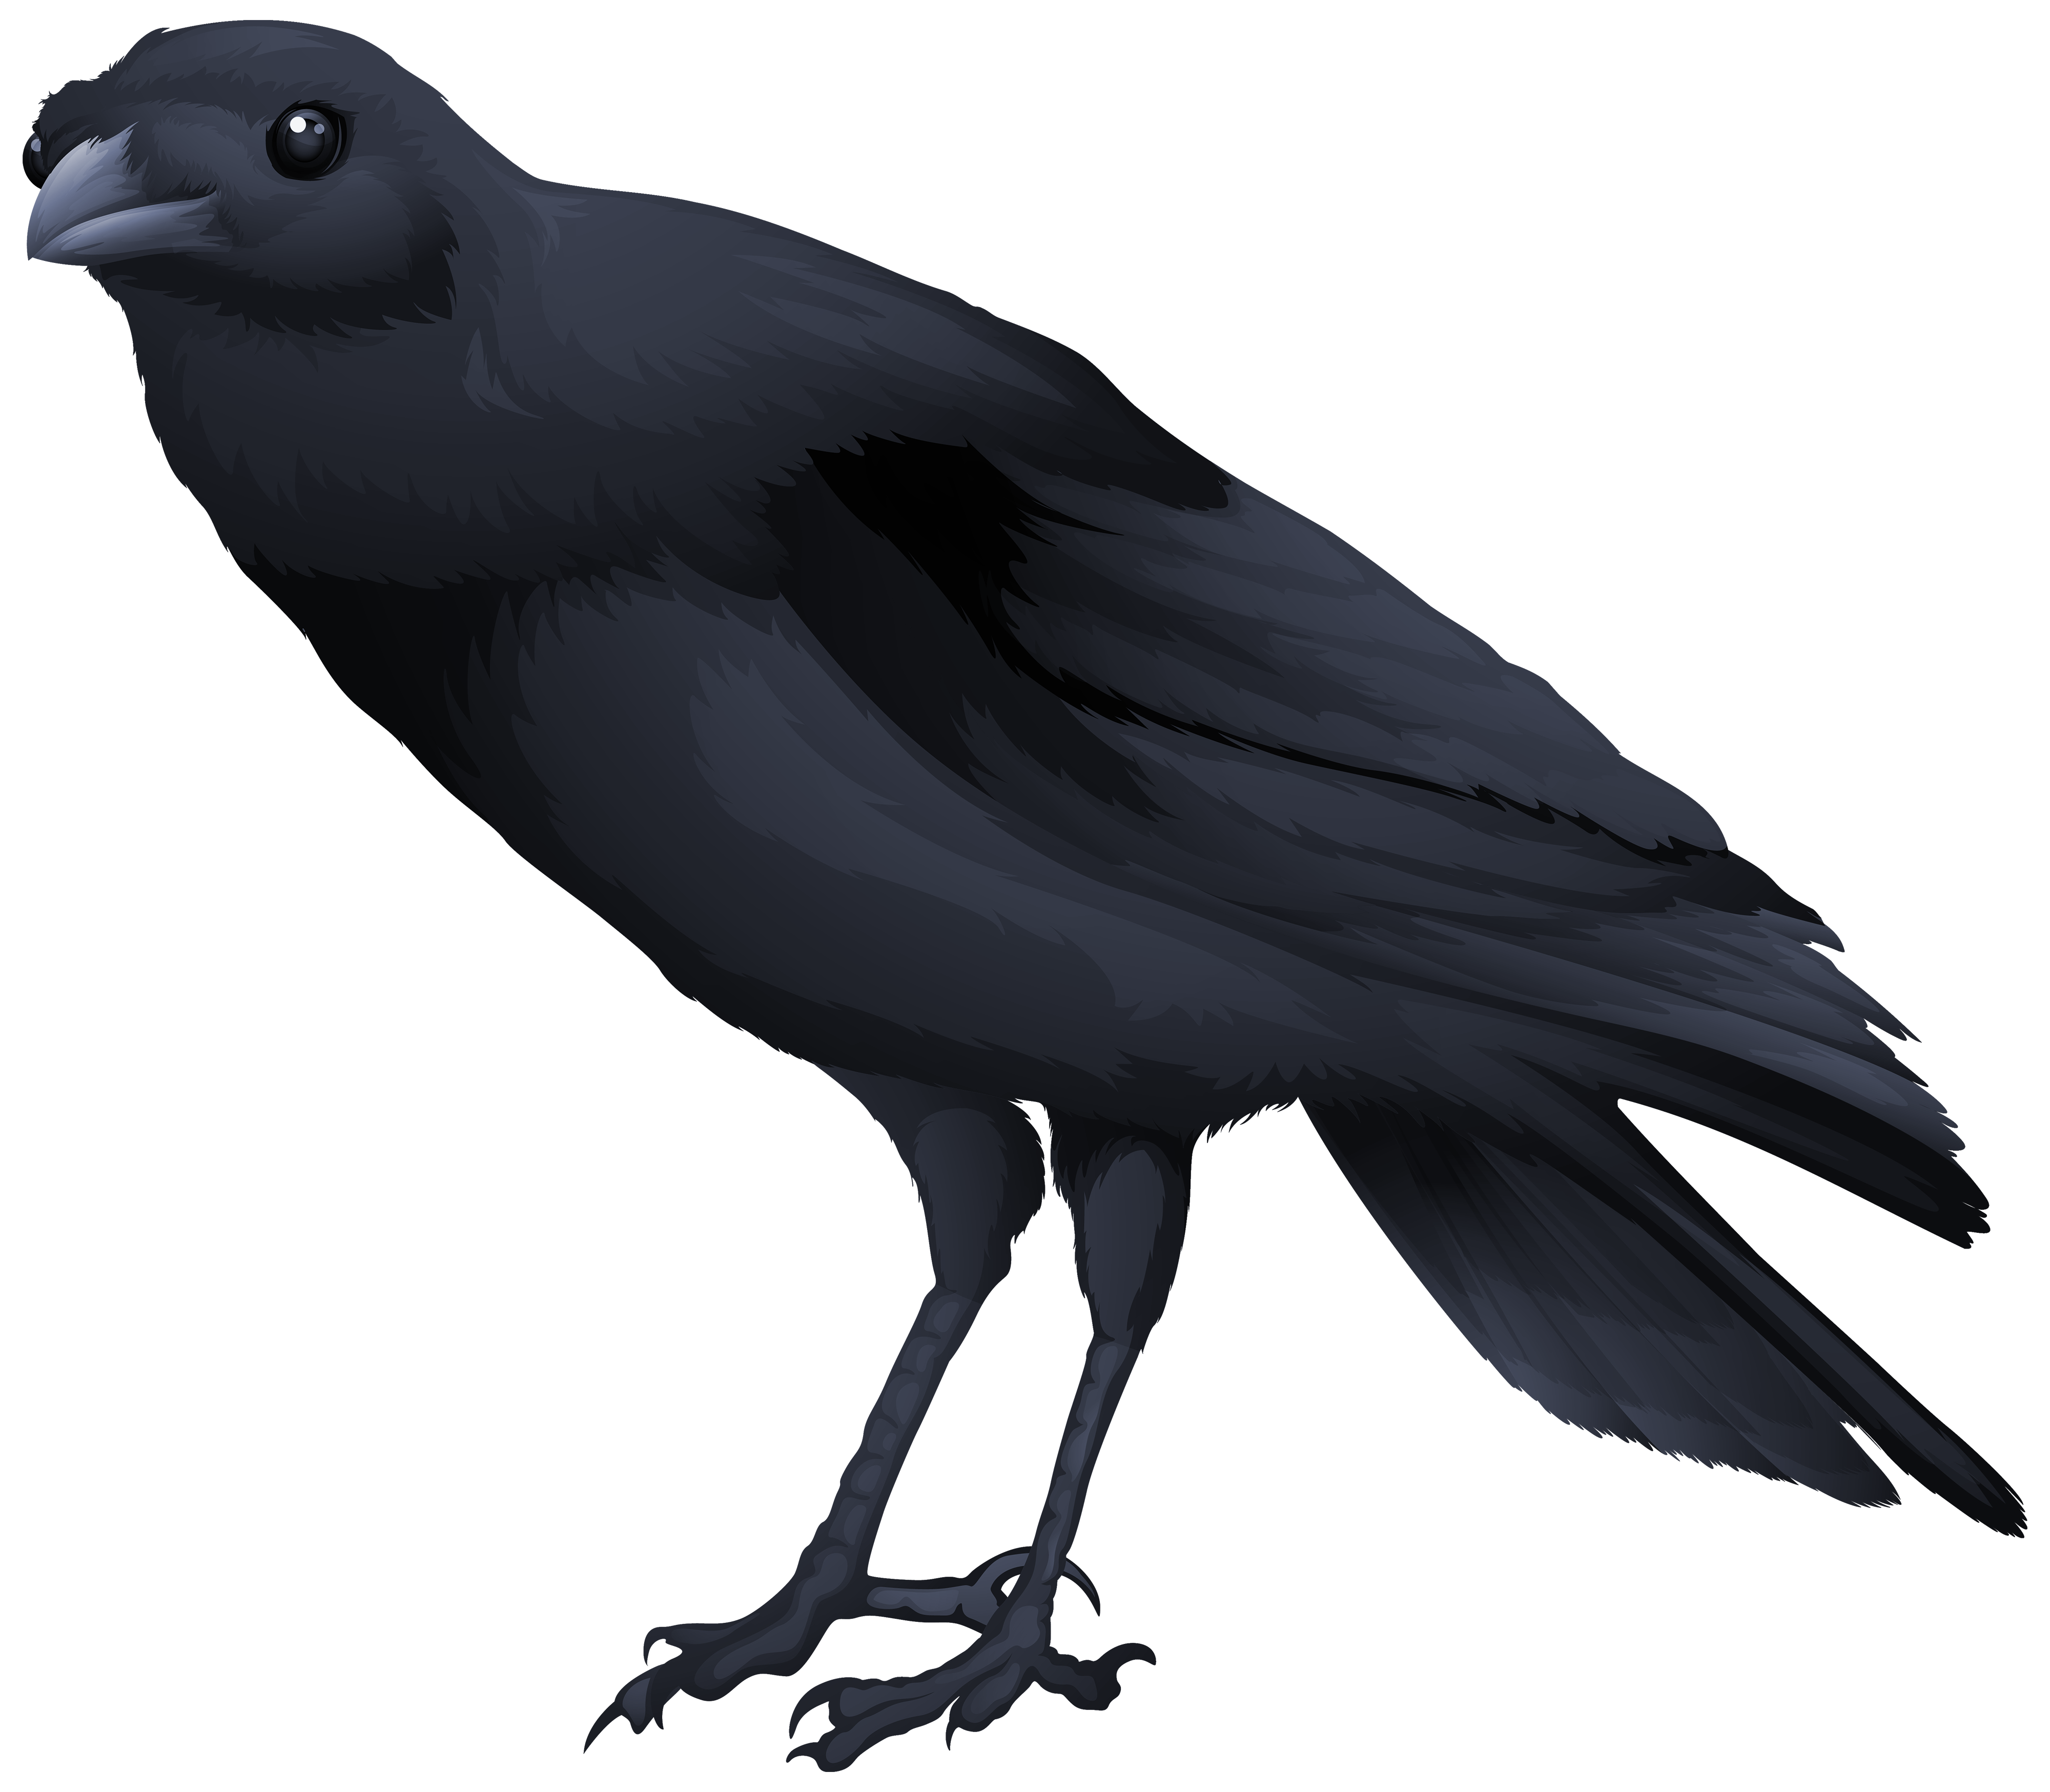 Bird png image gallery. Crow clipart black thing